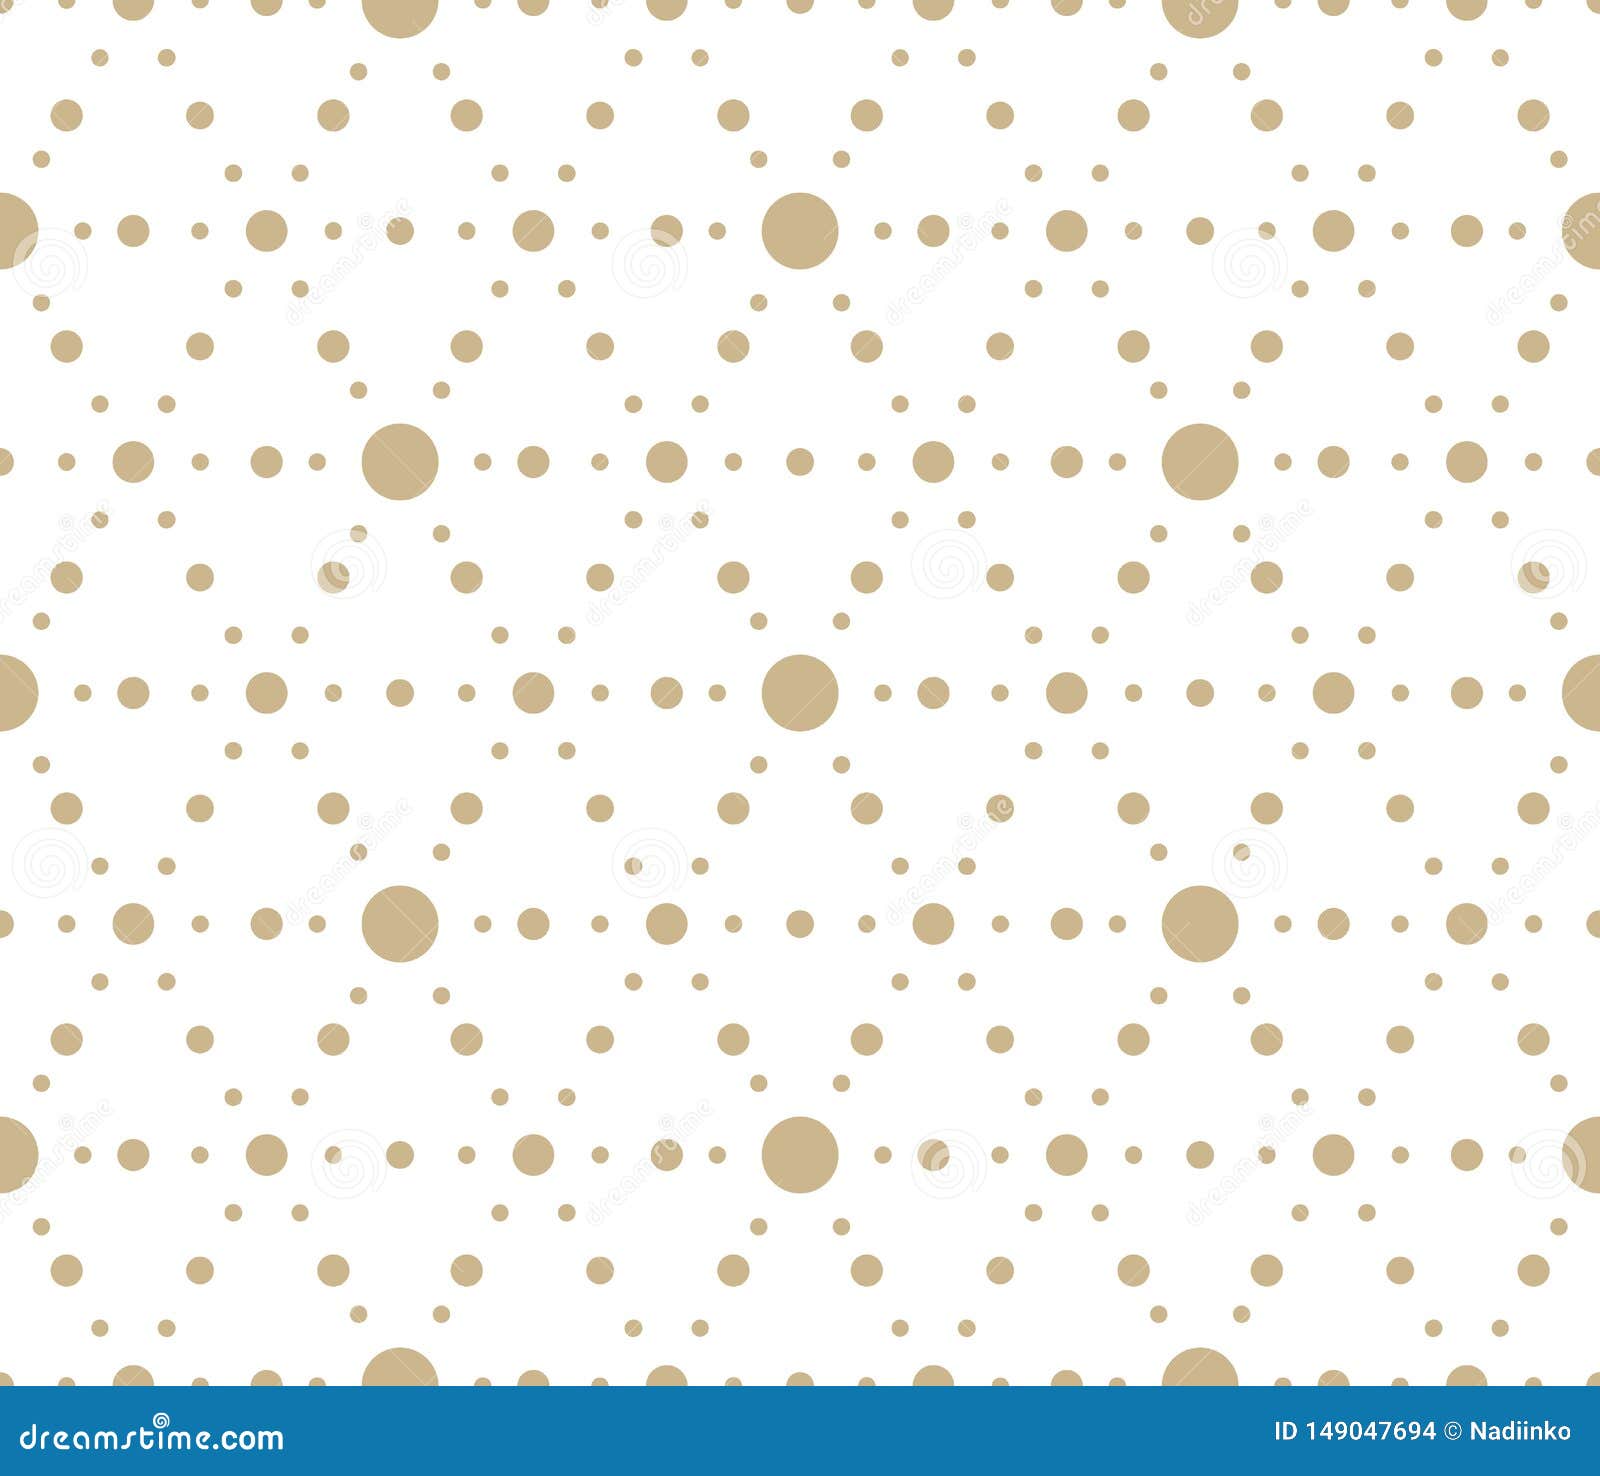 modern simple geometric  seamless pattern with gold flowers, line texture on white background. light abstract